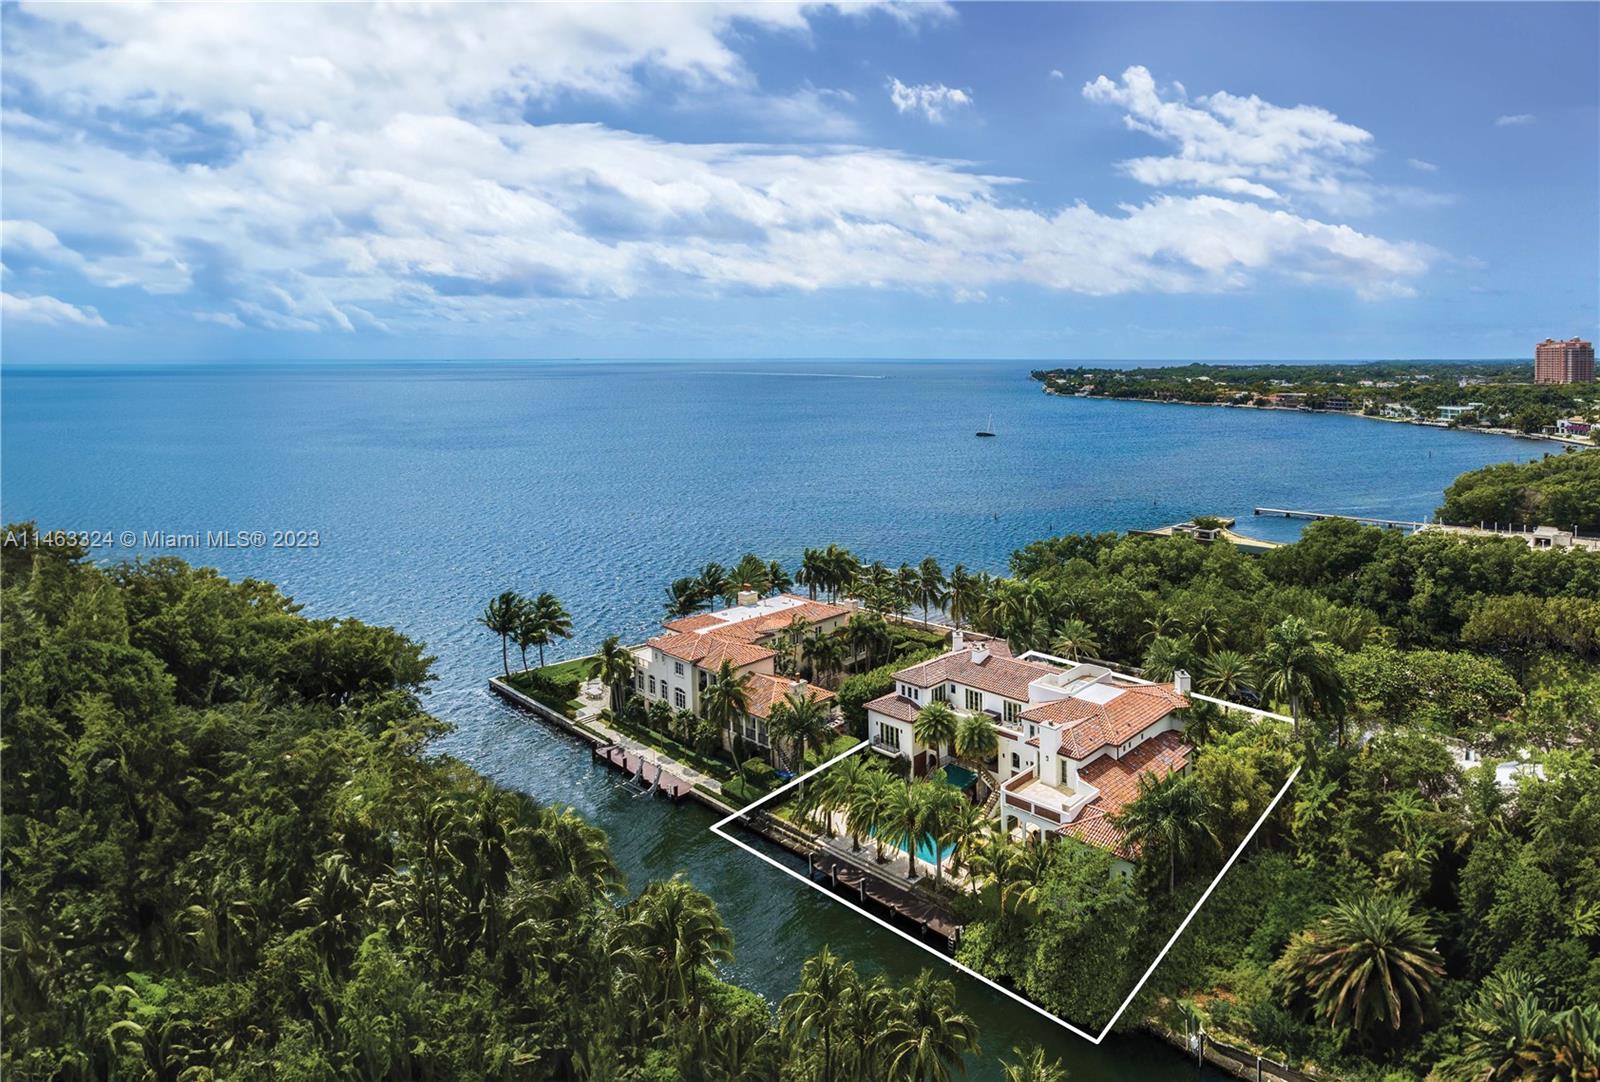 Located in the private guard-gated community “The Moorings”, this enchanting 17,873 total SF waterfront estate
is in the heart of the most sought-after neighborhood in Coconut Grove. Every detail of the 7 BD/7+2 BA home
was carefully selected, quality crafted. Multiple covered terraces provide a seamless blend of indoor and
outdoor spaces with endless water views. A gourmet eat-in kitchen offers an exquisite, oversized island and top-of-the-line luxury appliances. The elegant primary suite features a sitting room, walk-in closets, and a spa-like
bathroom with a roman tub and fireplace. On 143 ft of waterfront, home includes a pool, dock, house Generator, direct access to Biscayne Bay, rooftop terrace with views of the Bay. In close proximity to the finest dining, shopping, and schools.